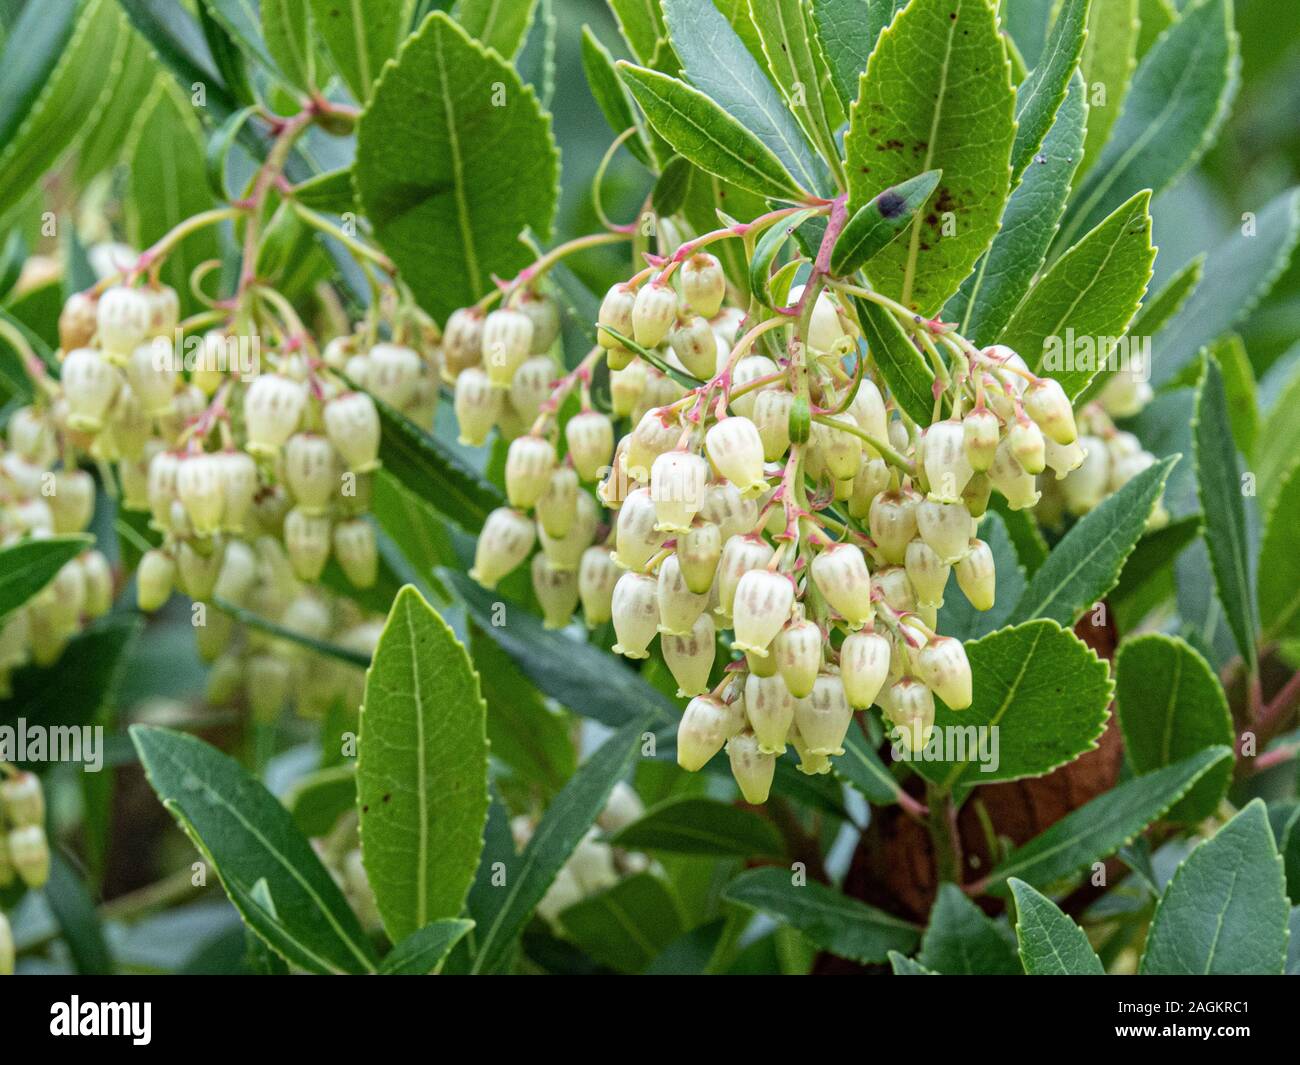 A group of cream bell shaped flowers on the strawberry tree Arbutus unedo Stock Photo